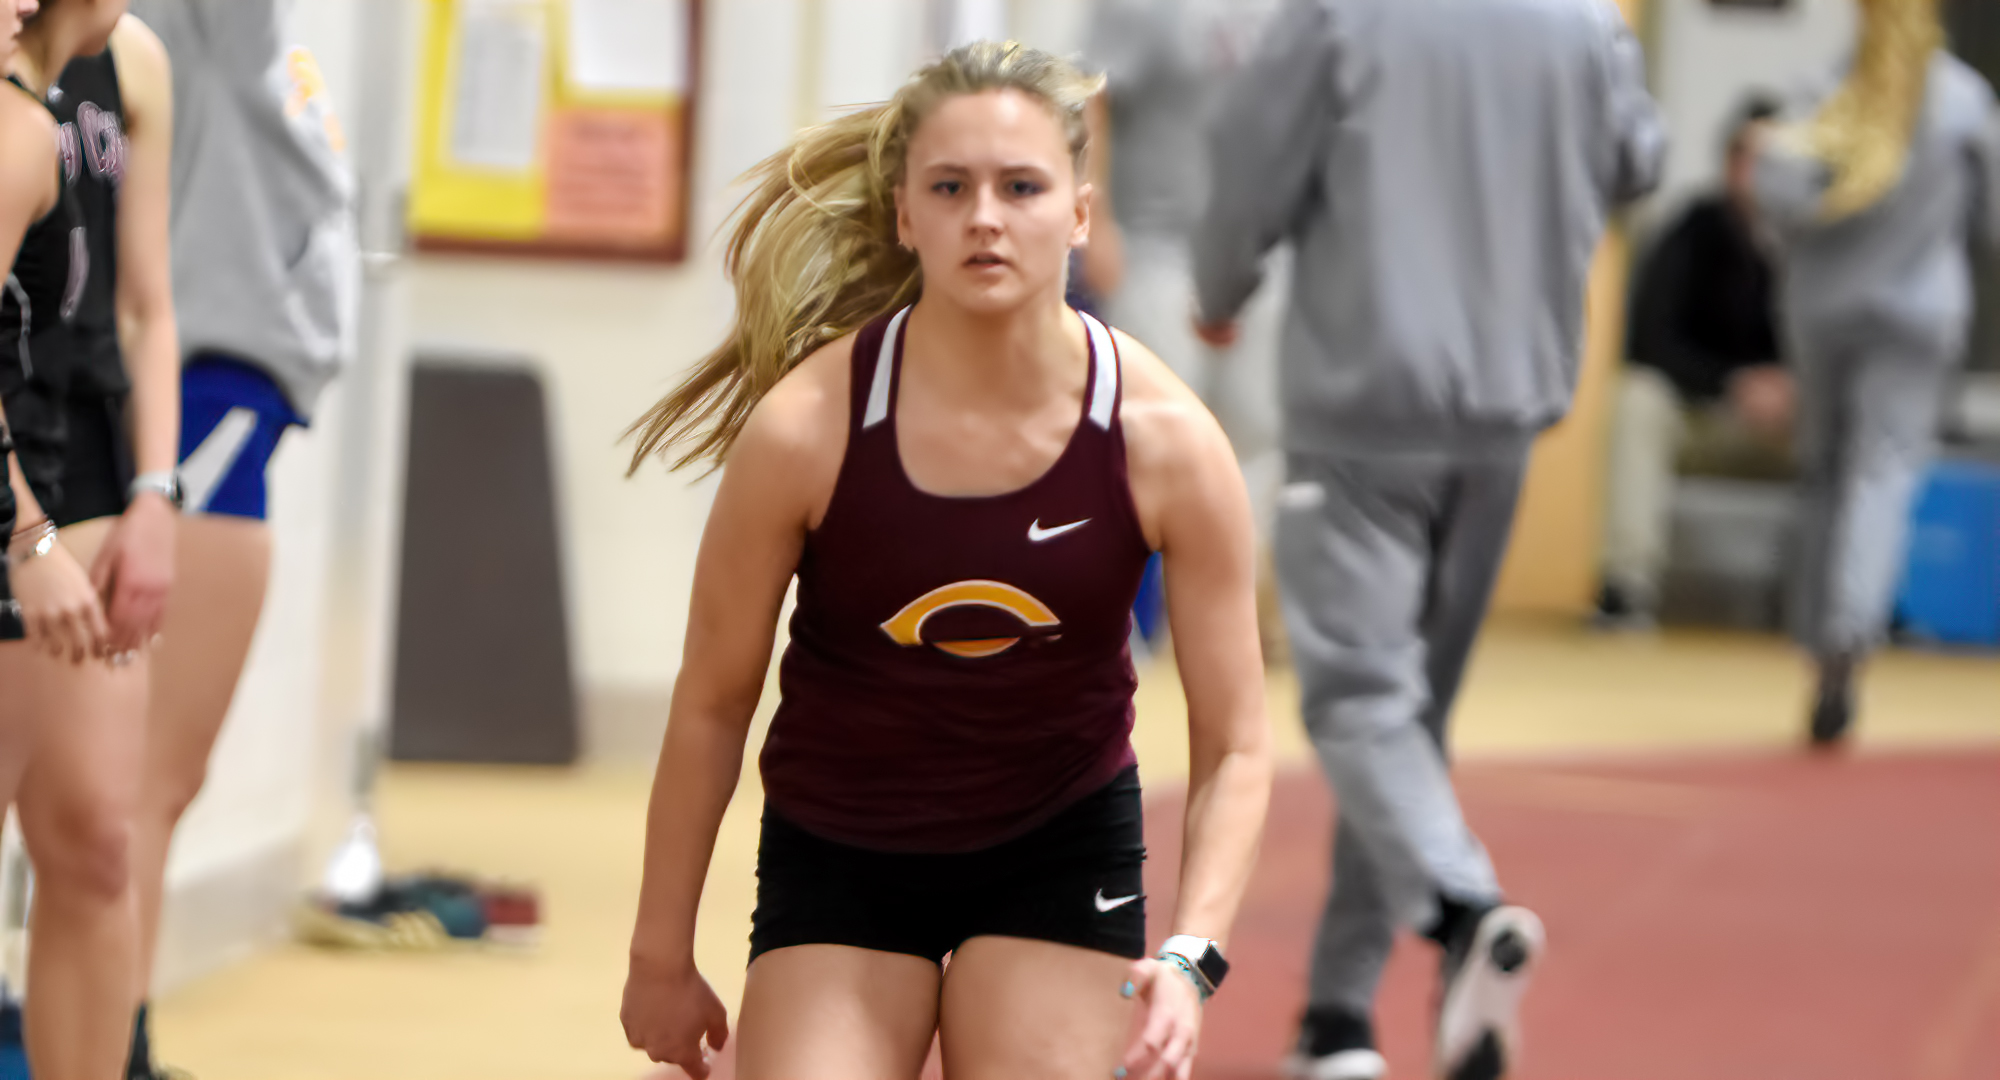 Sophomore Avery Kenning competed in the triple jump and the long jump at the CSB 4th Weekly Invite. She posted a personal-best mark of 33-08.50 in the triple jump.